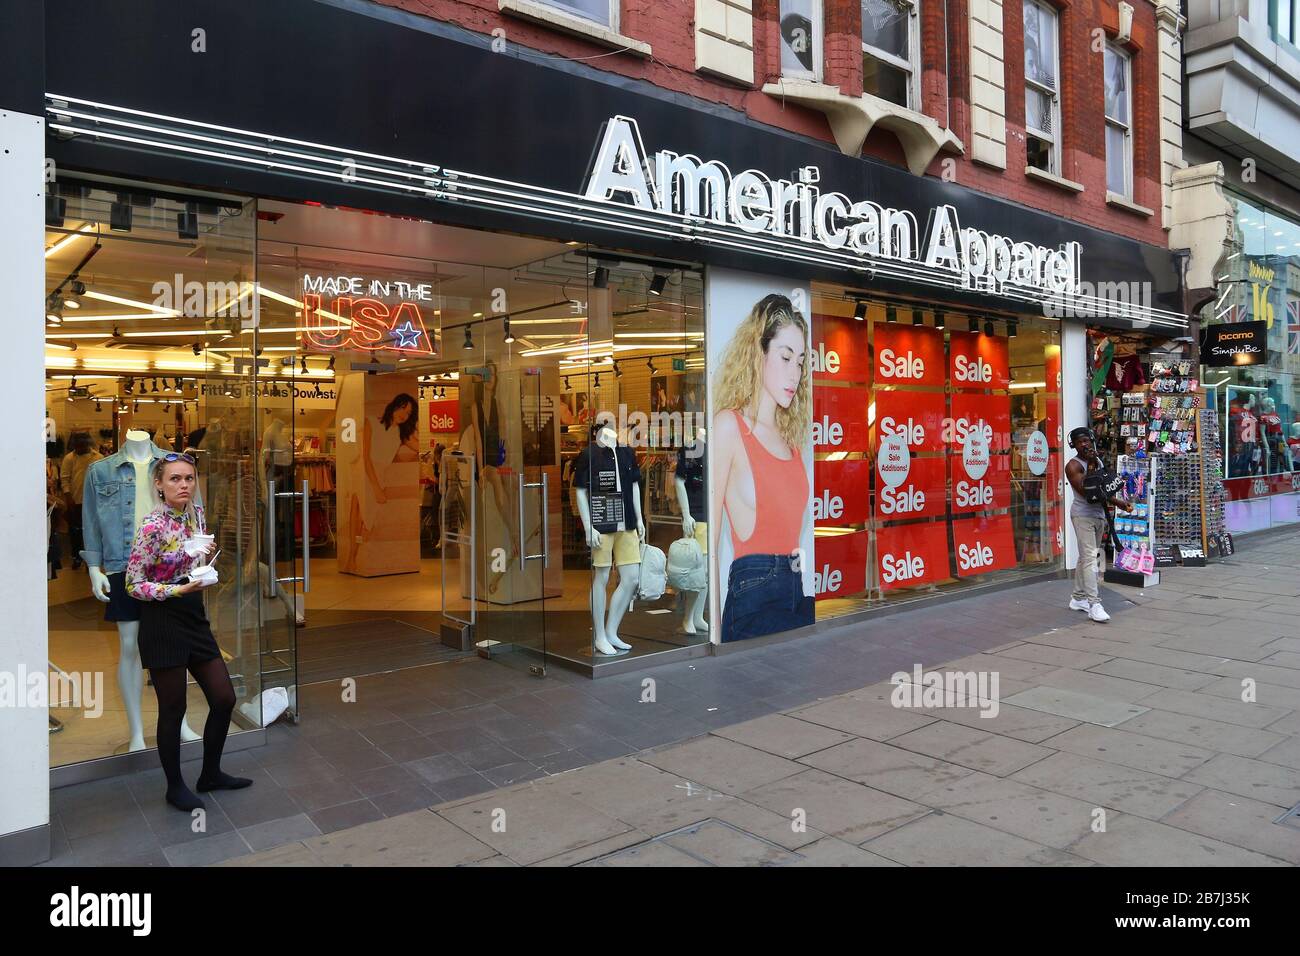 LONDON, UK - JULY 6, 2016: People shop at American Apparel, Oxford Street in London. Oxford Street has approximately half a million daily visitors and Stock Photo